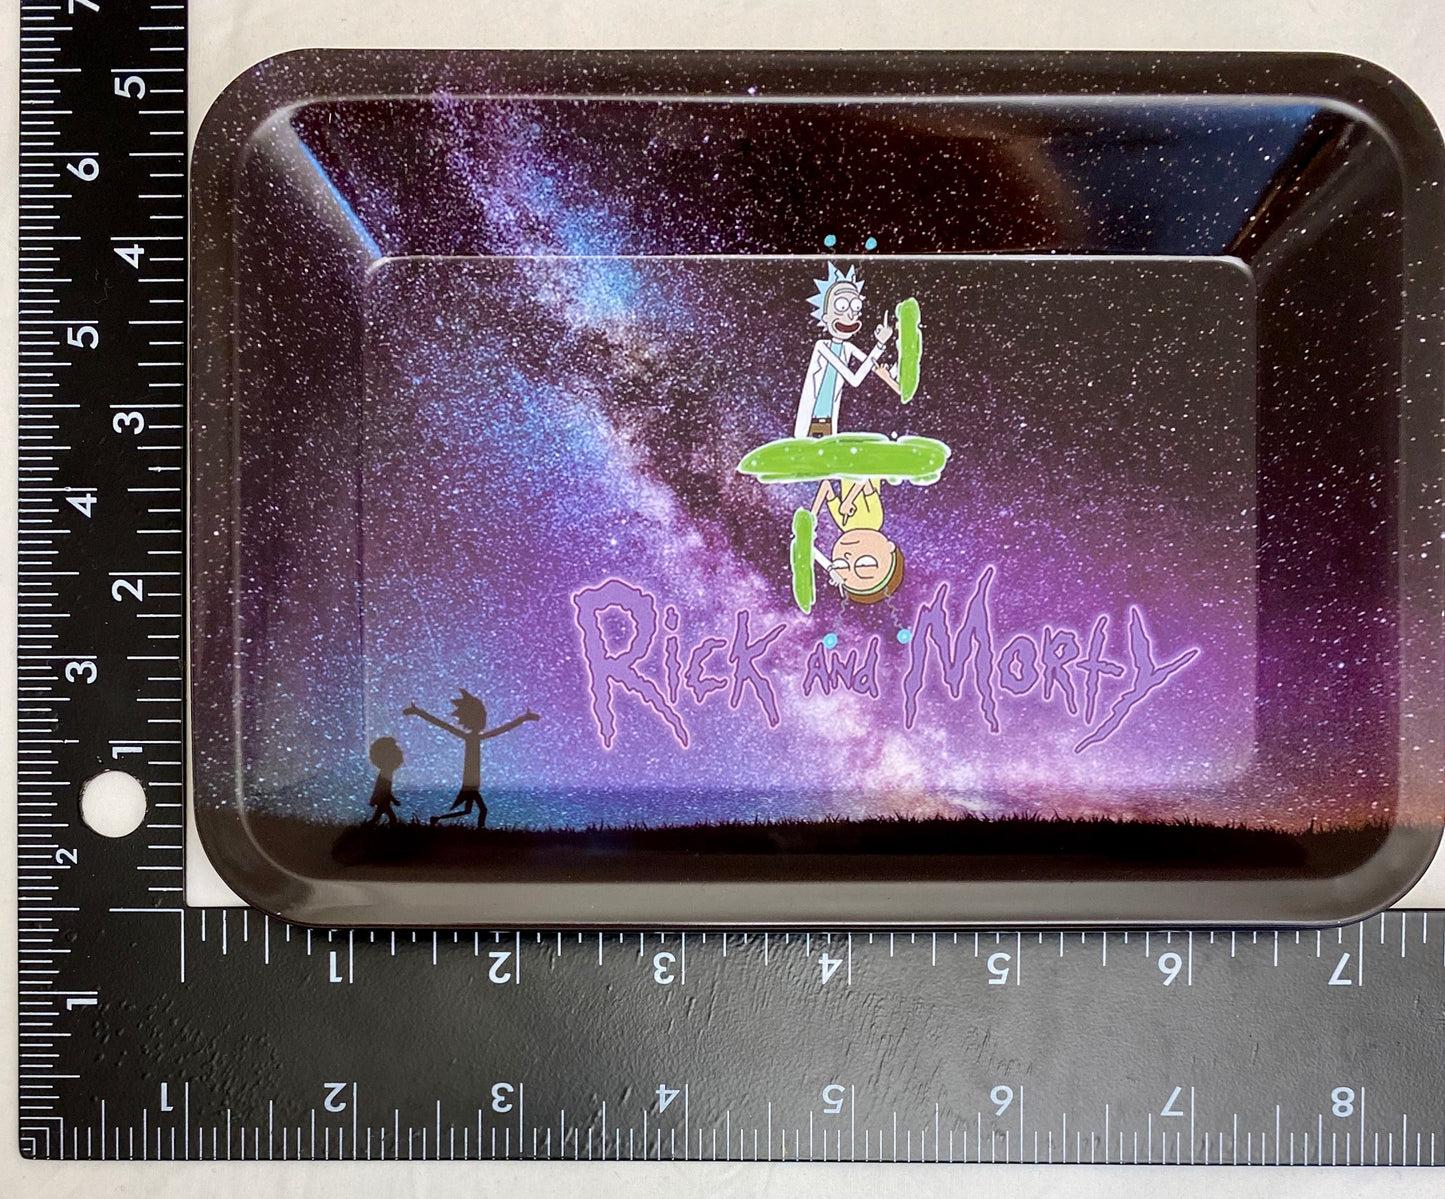 Tray printed SMALL SIZE R&M SPACE 2